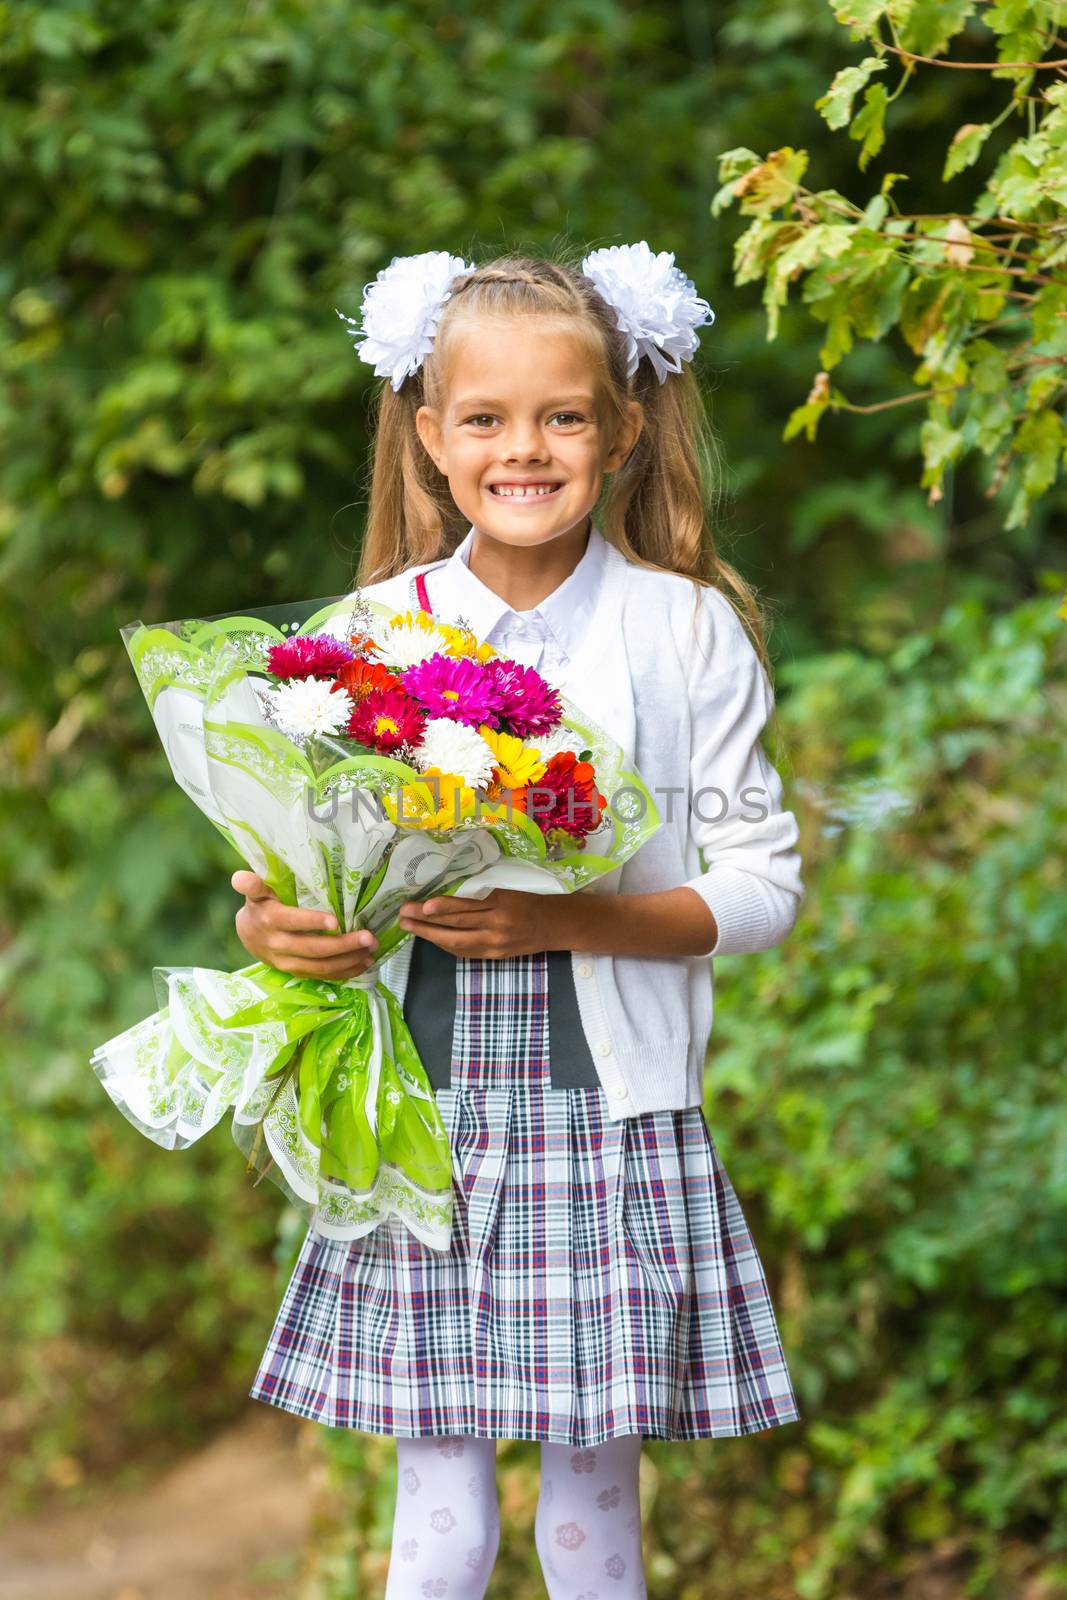 First grader with a bouquet of flowers smiling happily by Madhourse